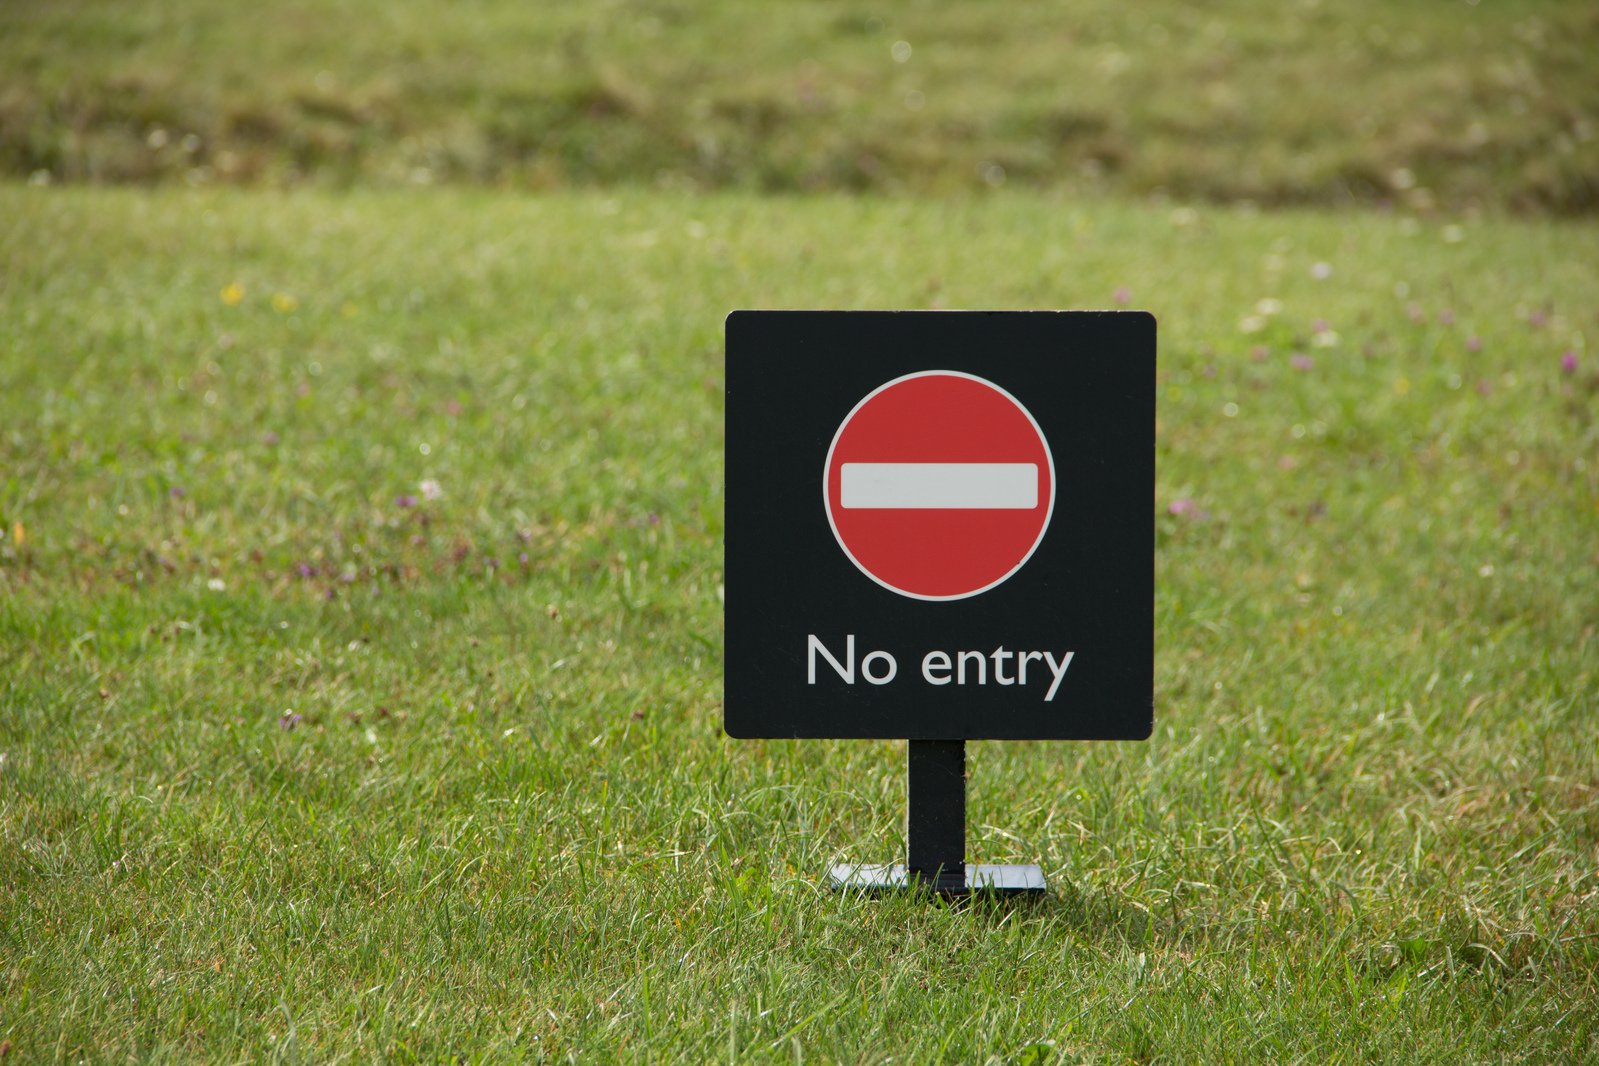 there is a sign in the grass that says no entry